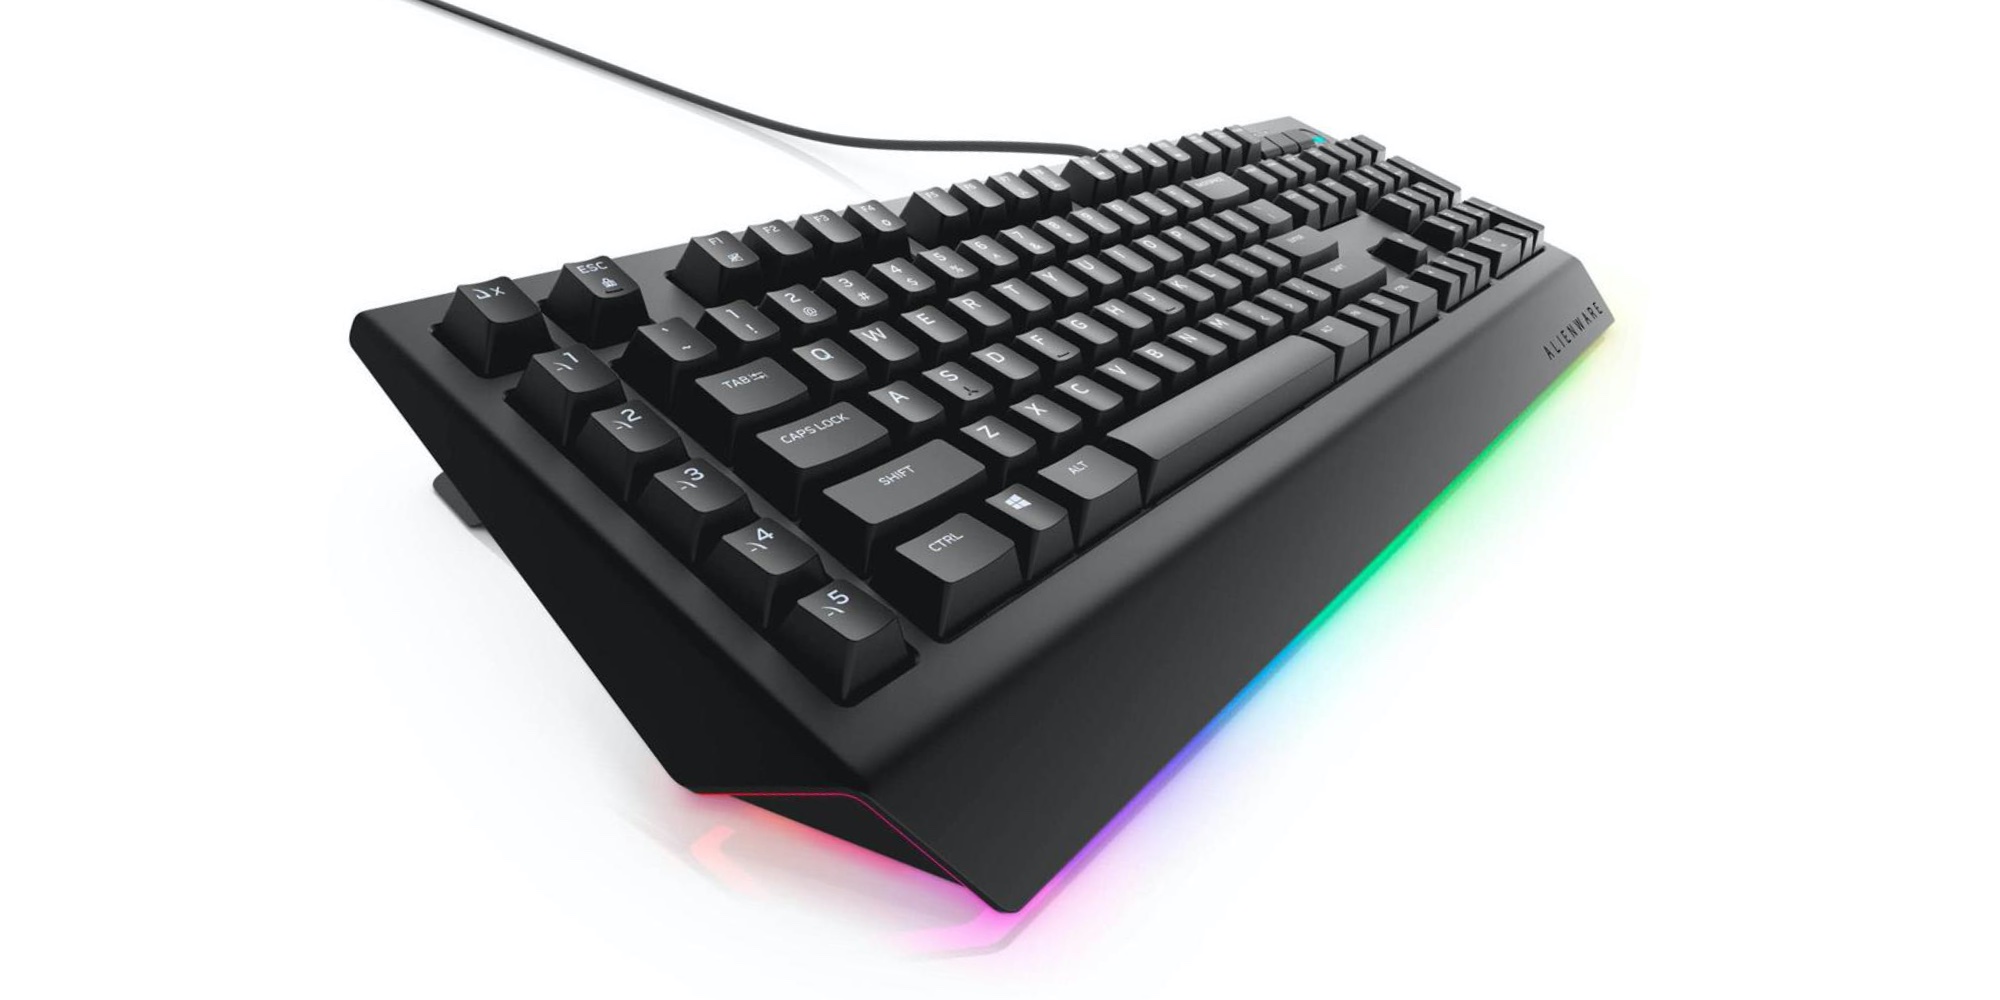 Alienware's $45 Advanced Gaming Keyboard ambient RGB lighting (Save $20)